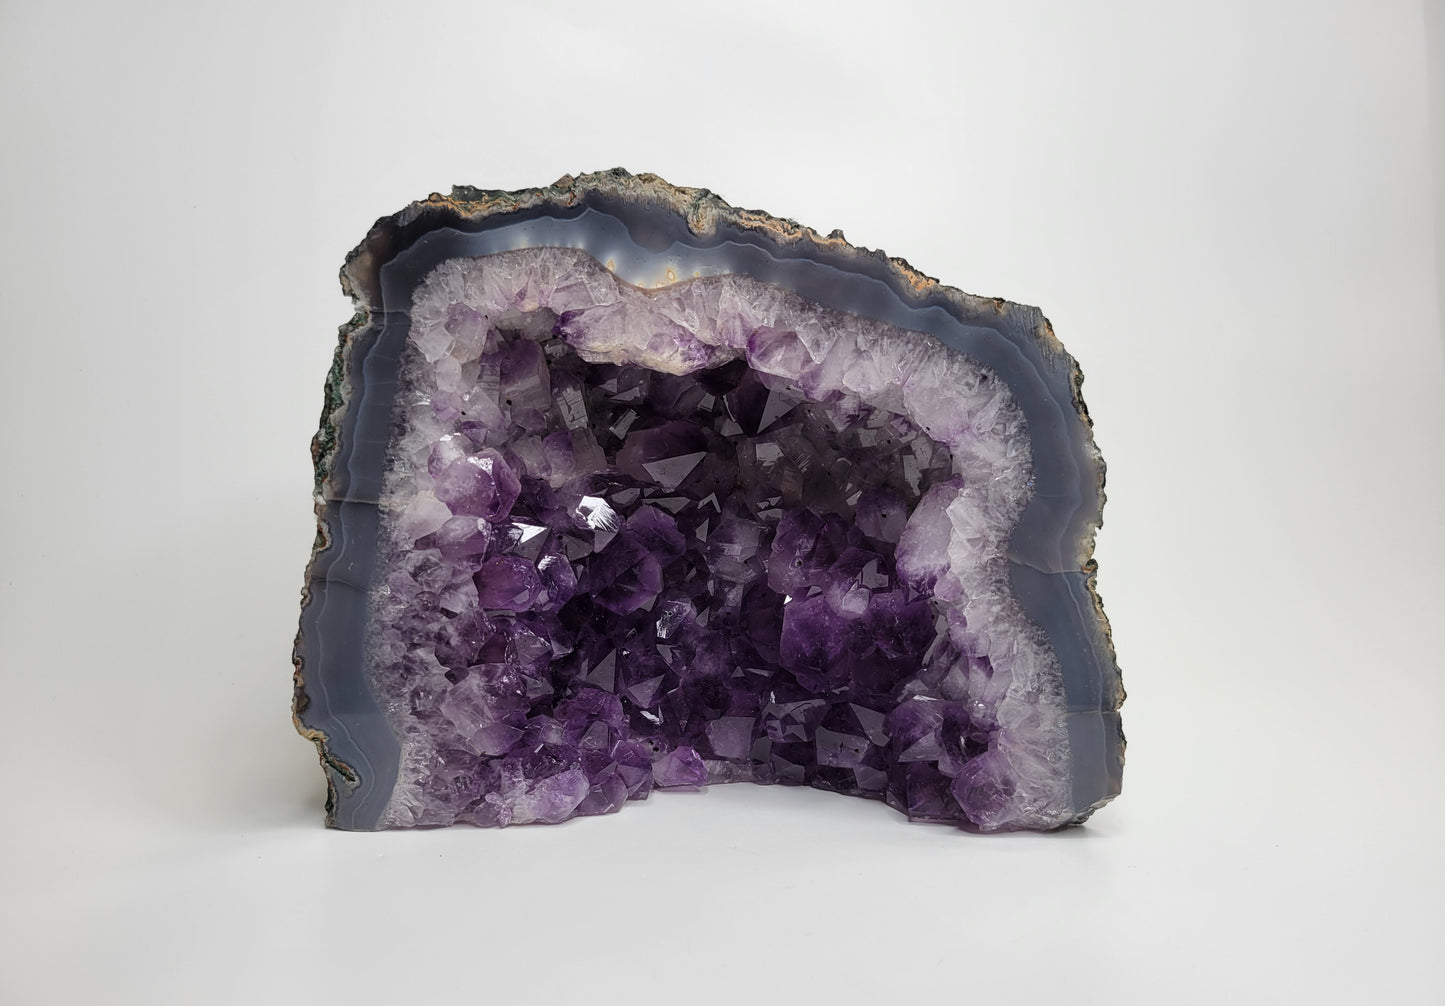 Amethyst Cathedral from Brazil, Cut and Polished Geode (W 7 3/4 X D 3 X H 6 1/8 inches)